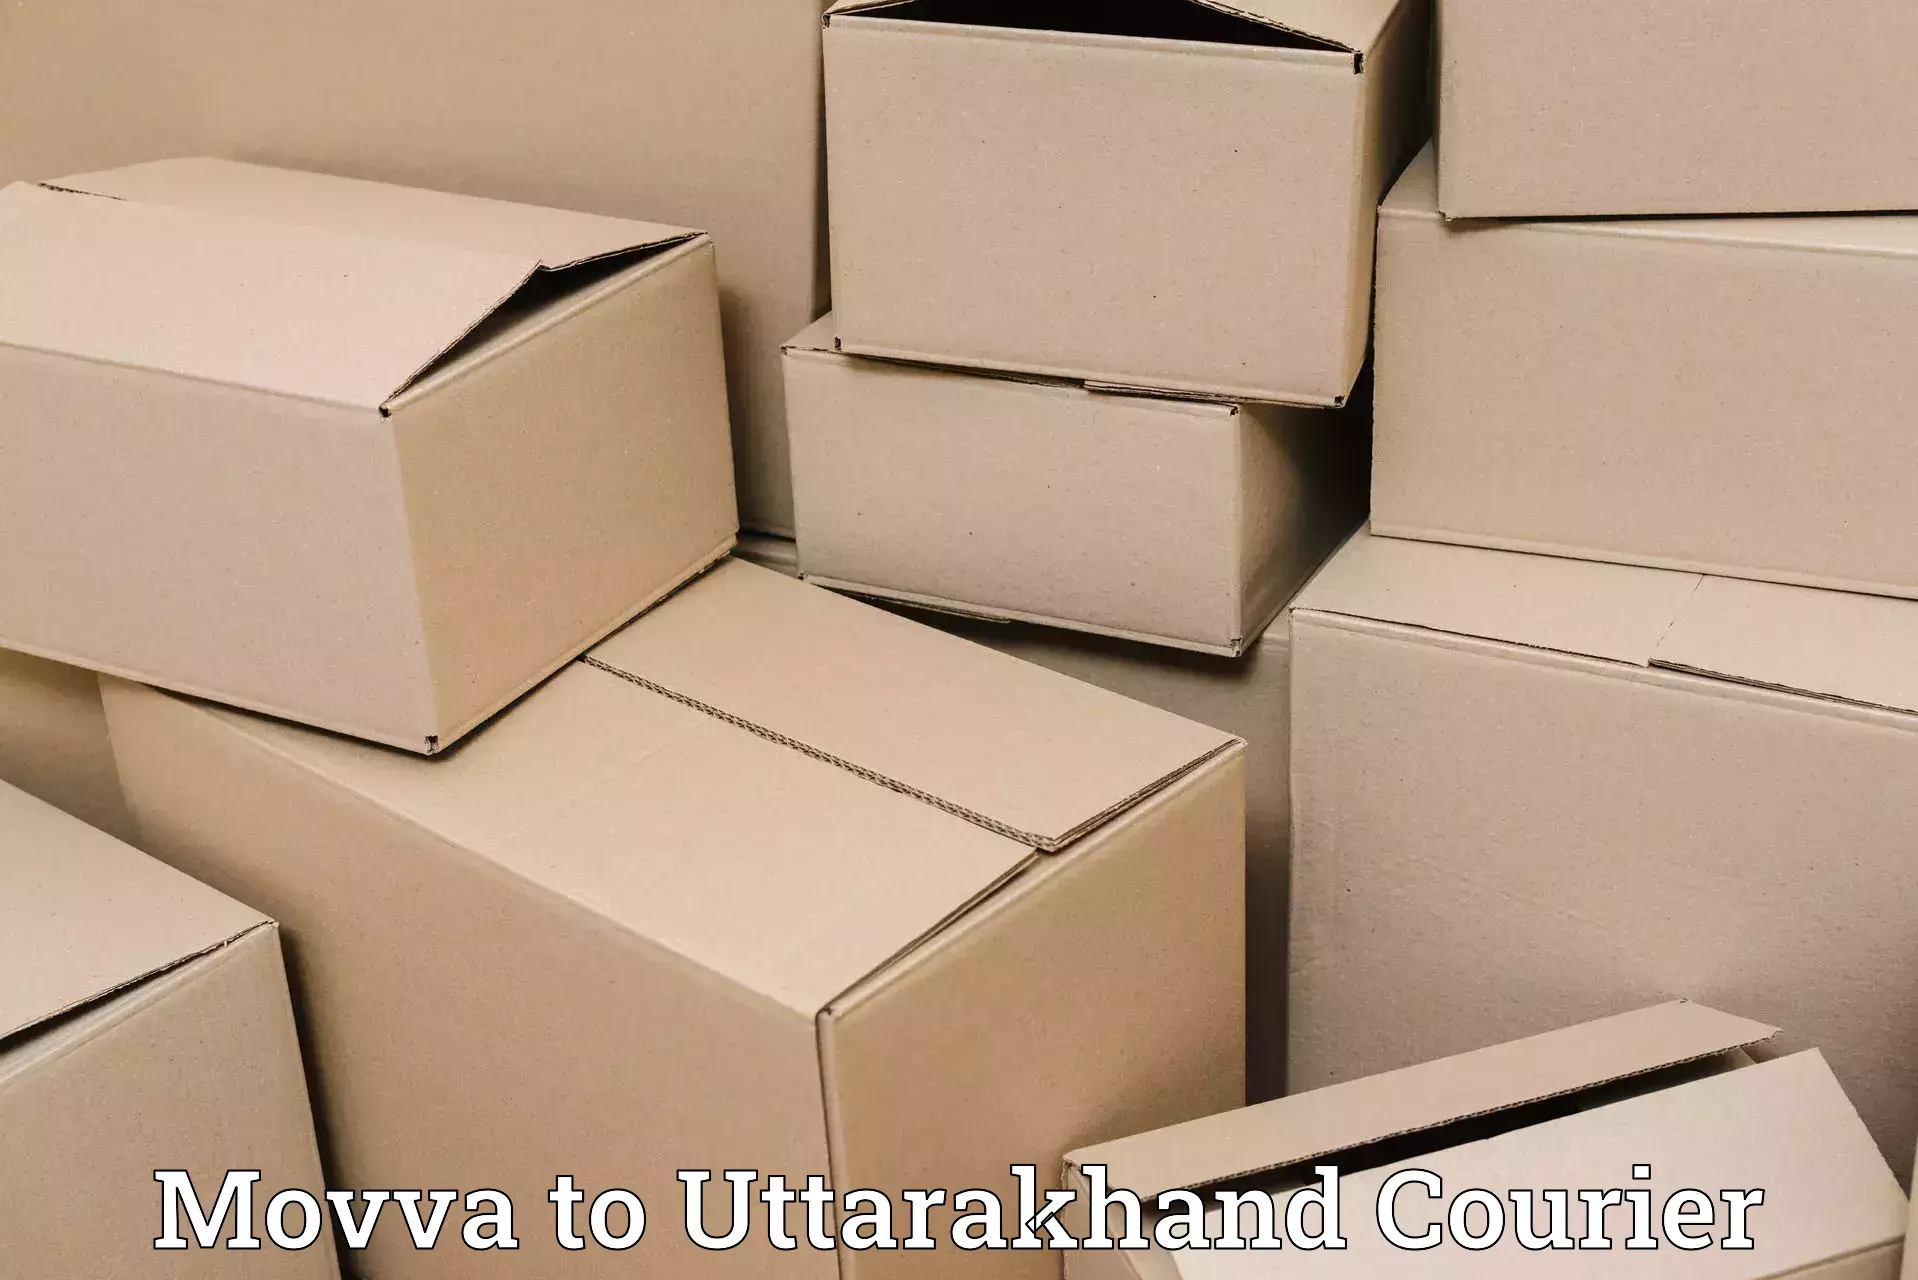 Efficient shipping operations Movva to Pithoragarh